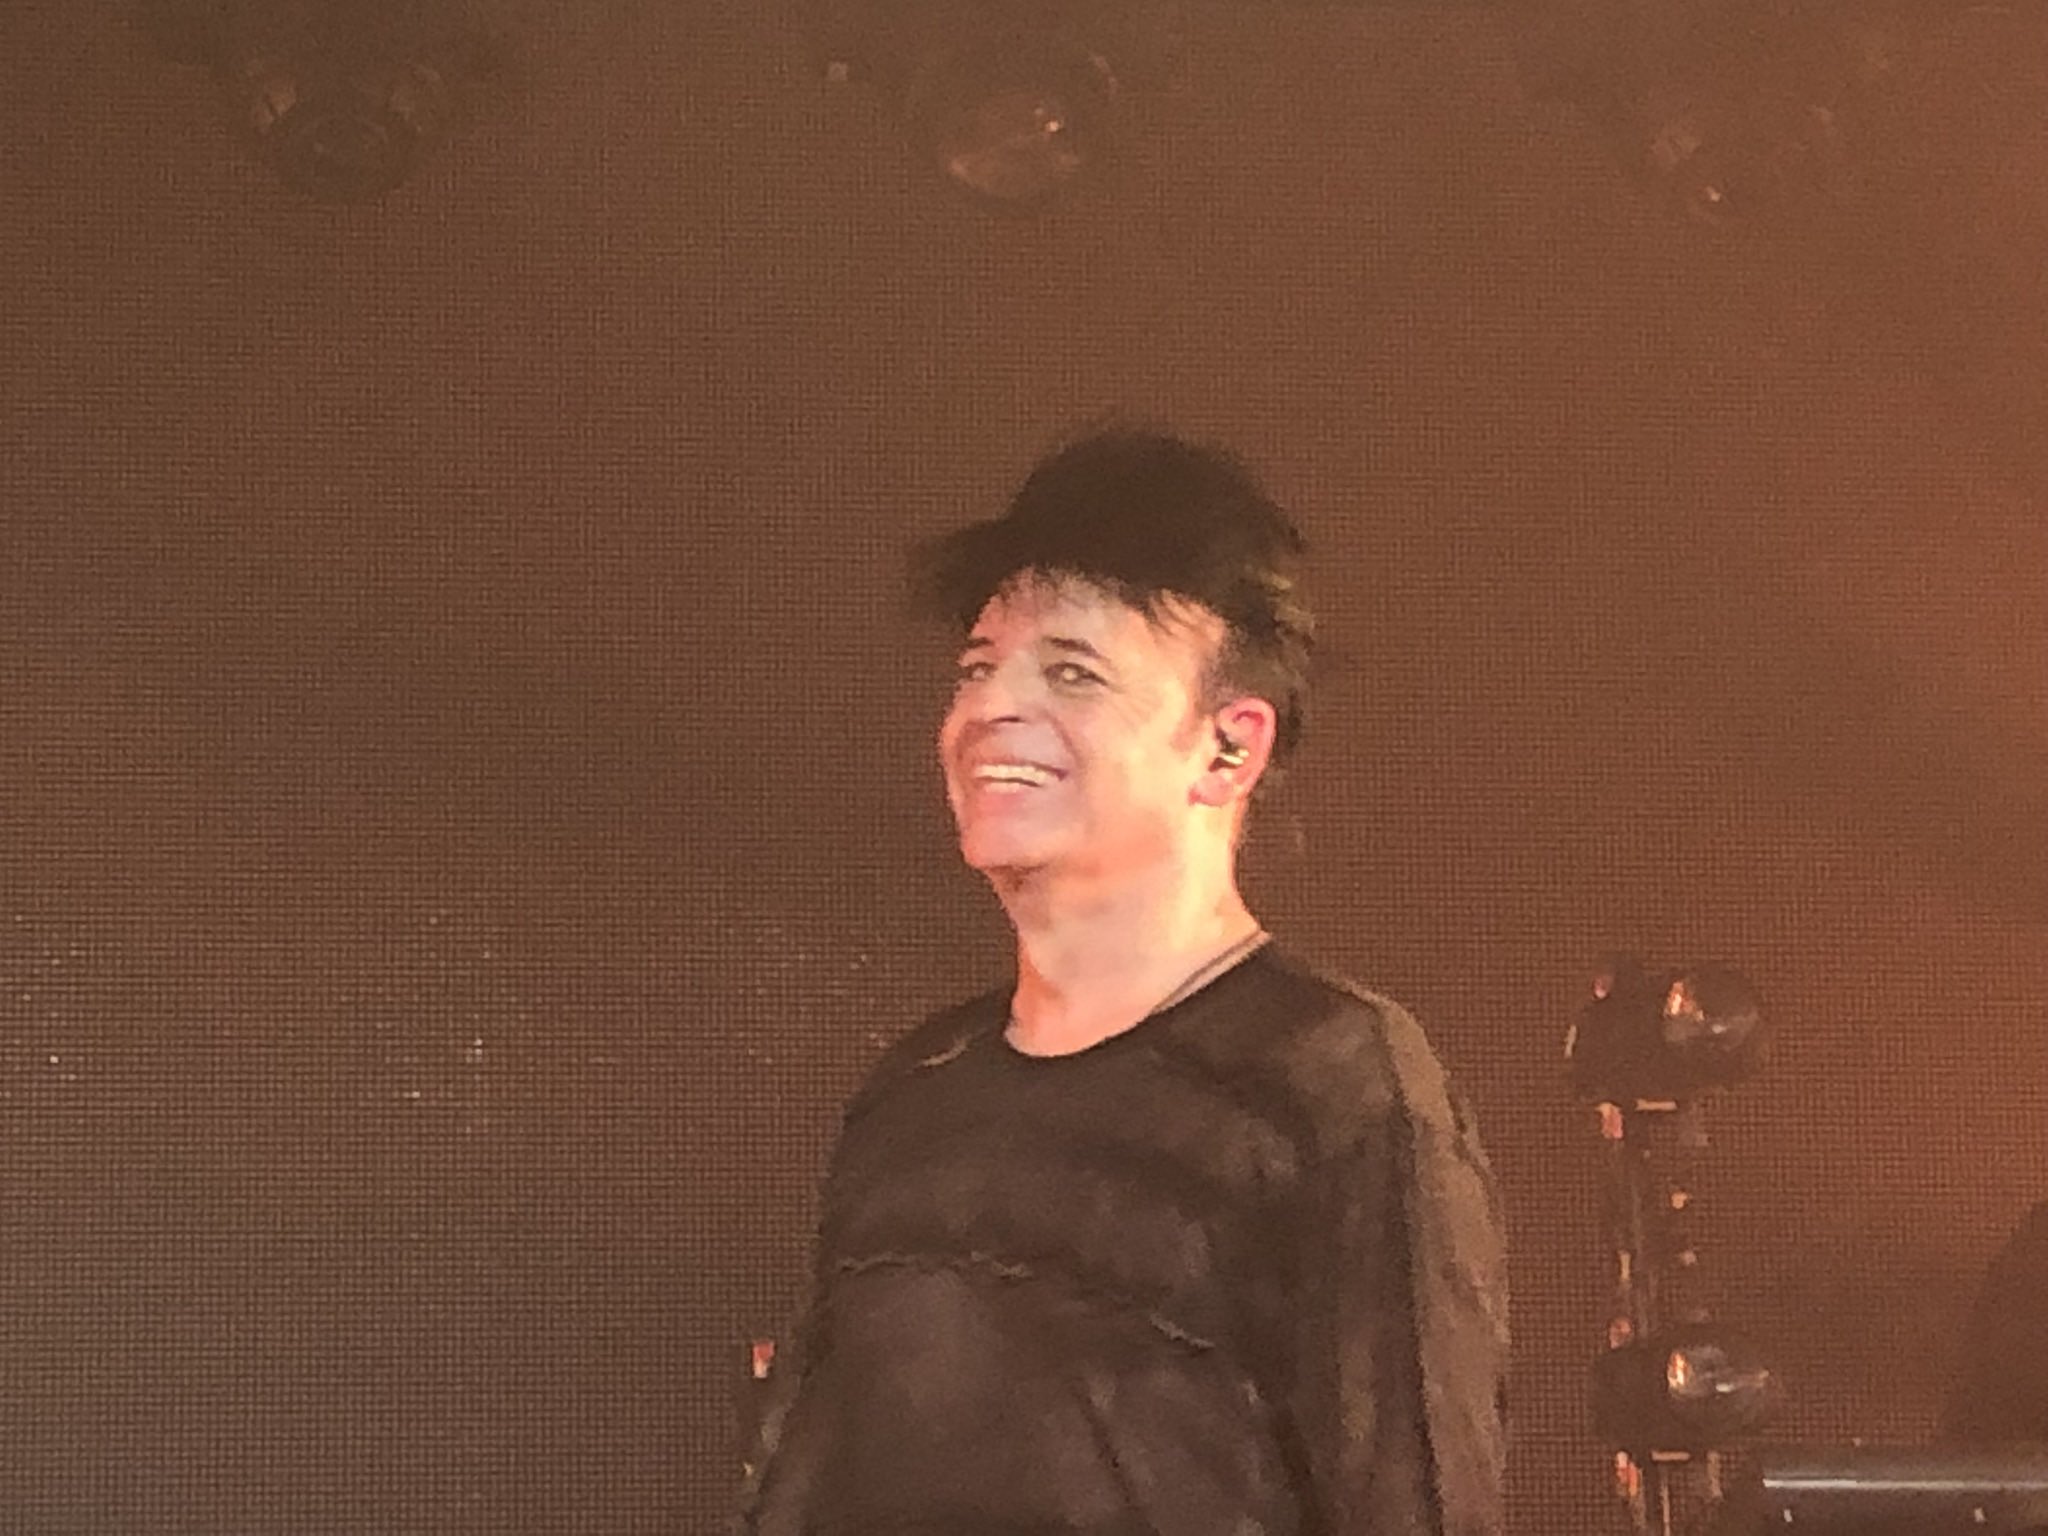 Happy 64th Birthday to singer Gary Numan. It was great to see Gary perform live in Cardiff several years ago!   